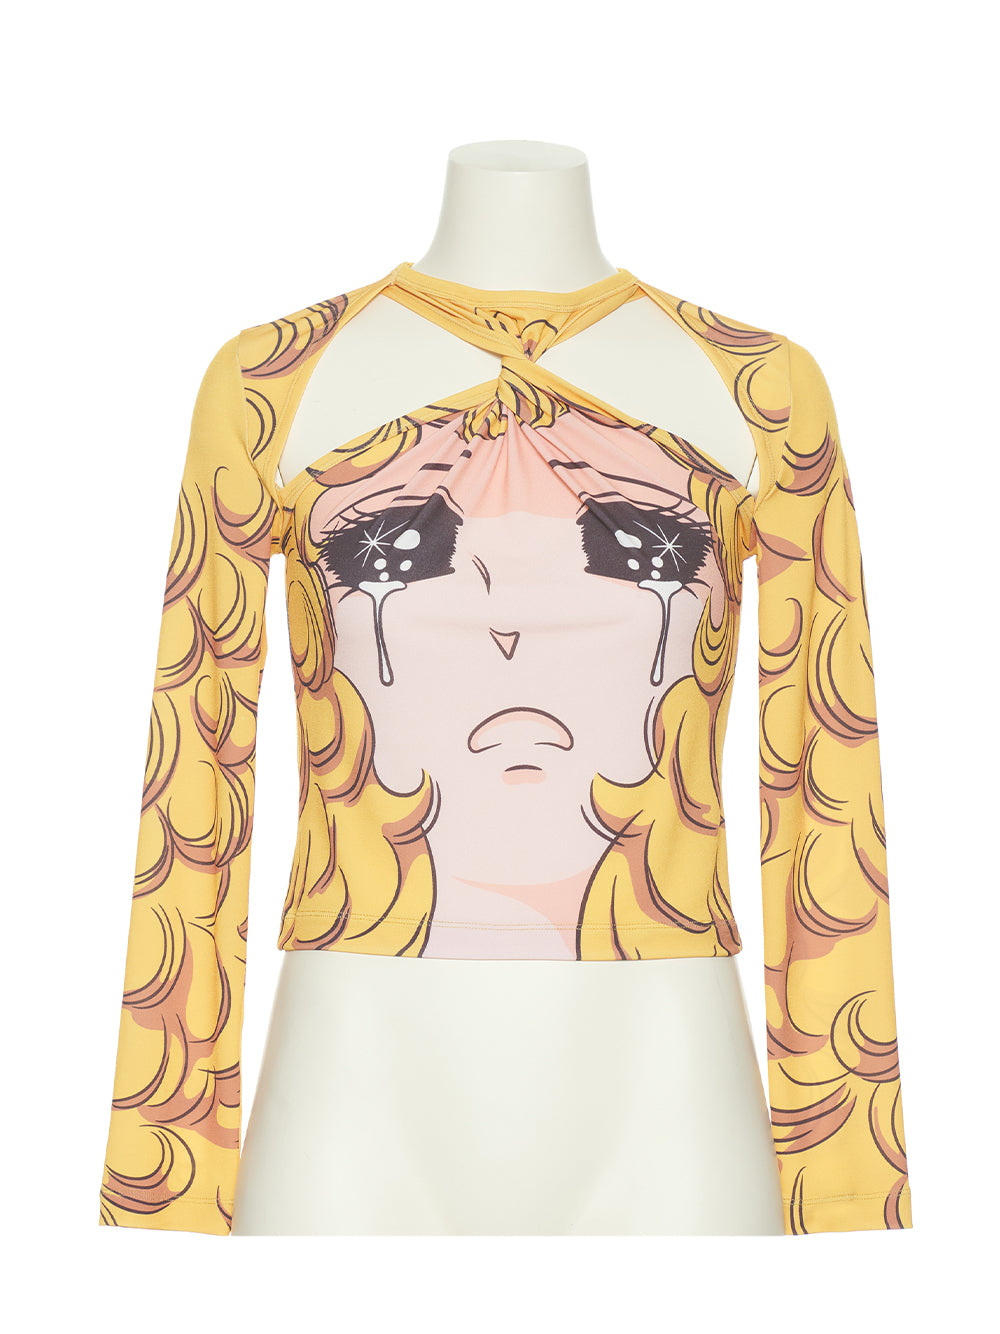 Crying Girl Neck Twisted Jersey Top (Yellow)